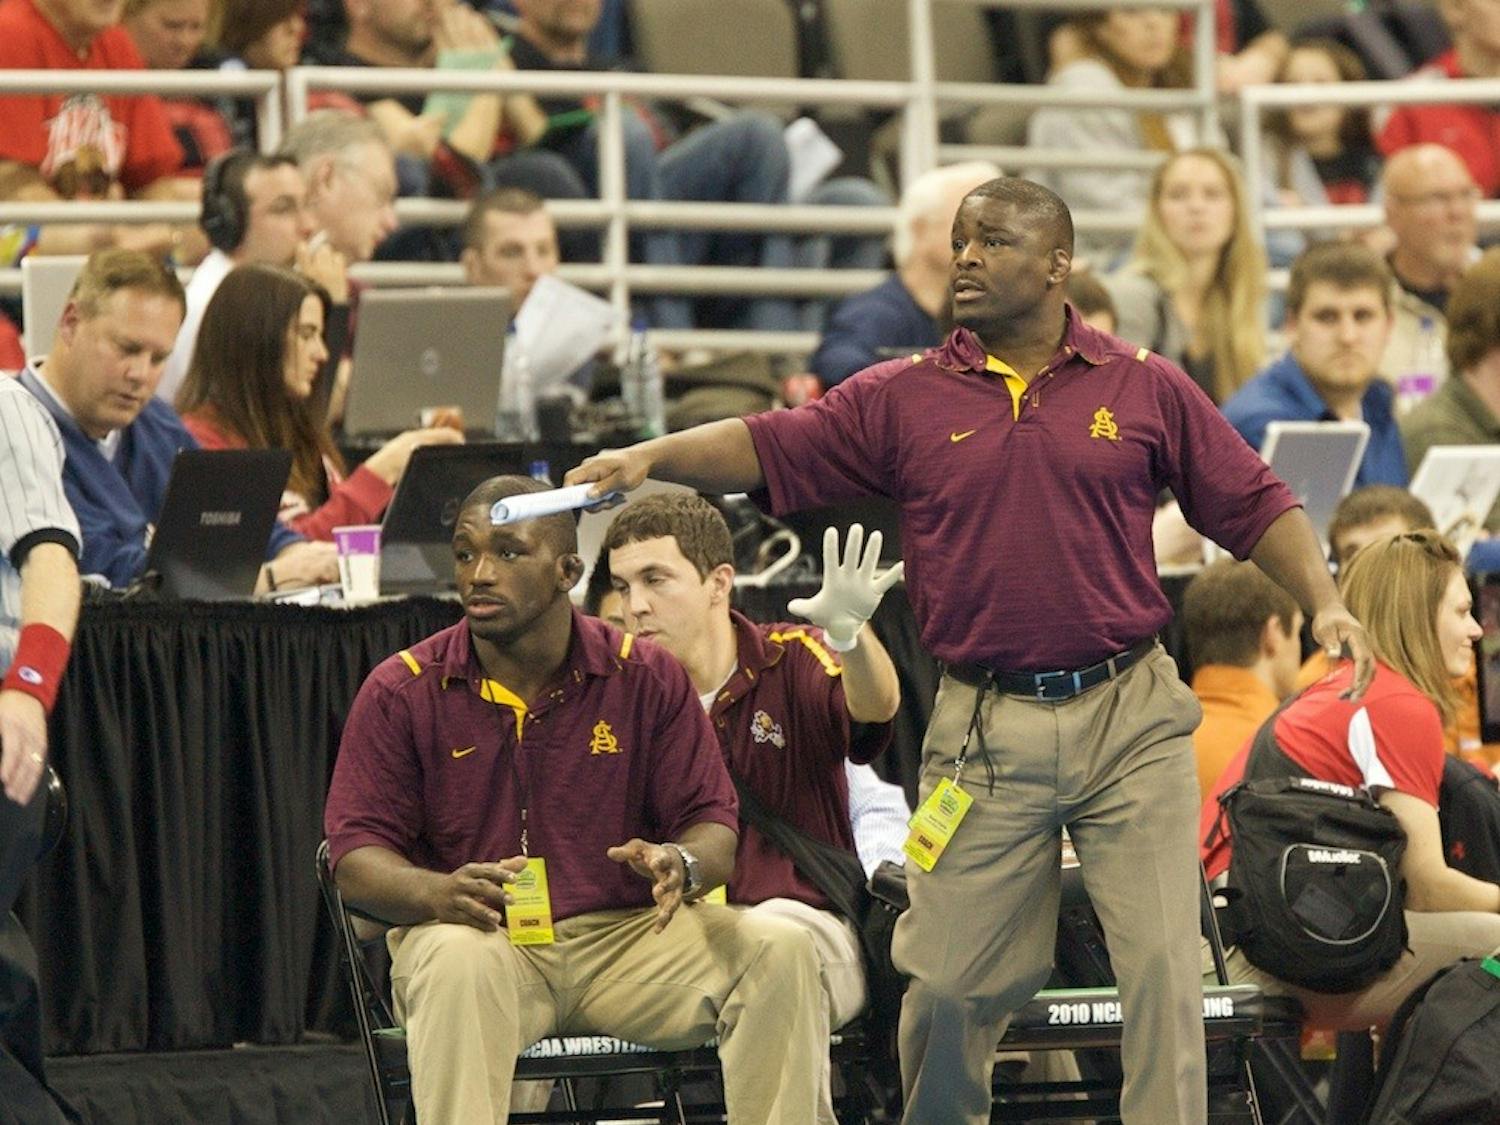 ASU coach Shawn Charles directs his team during the 2010 NCAA Championships. (Photo Courtesy of ASU Media Relations)